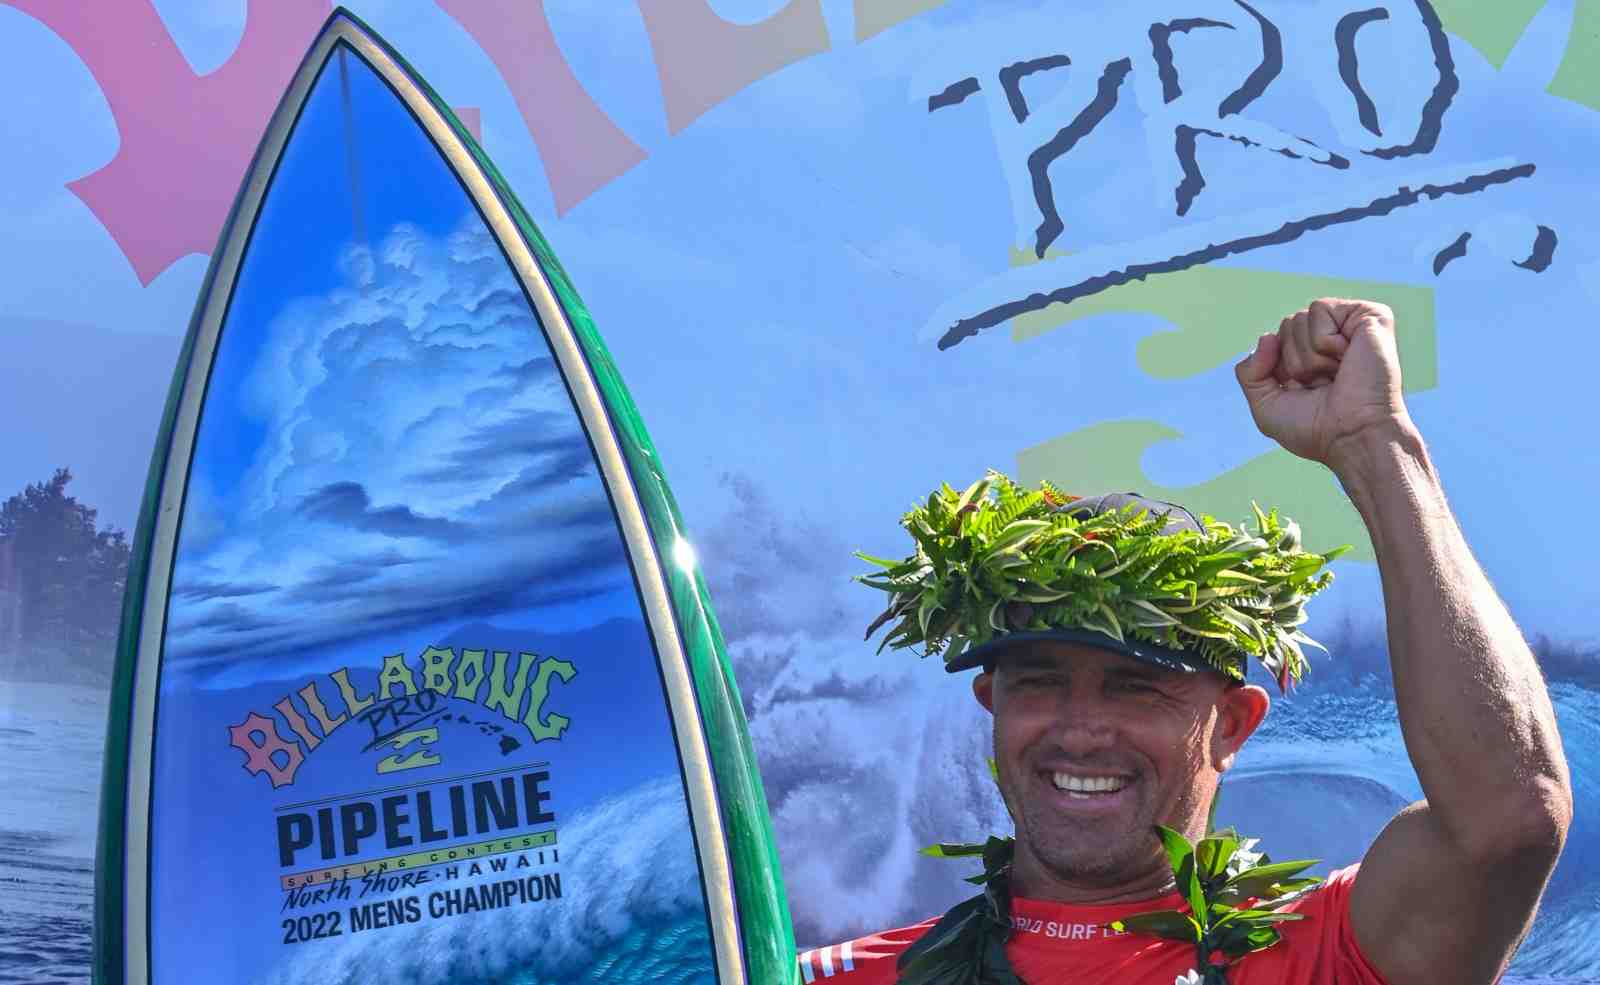 Who is the best big wave surfer?